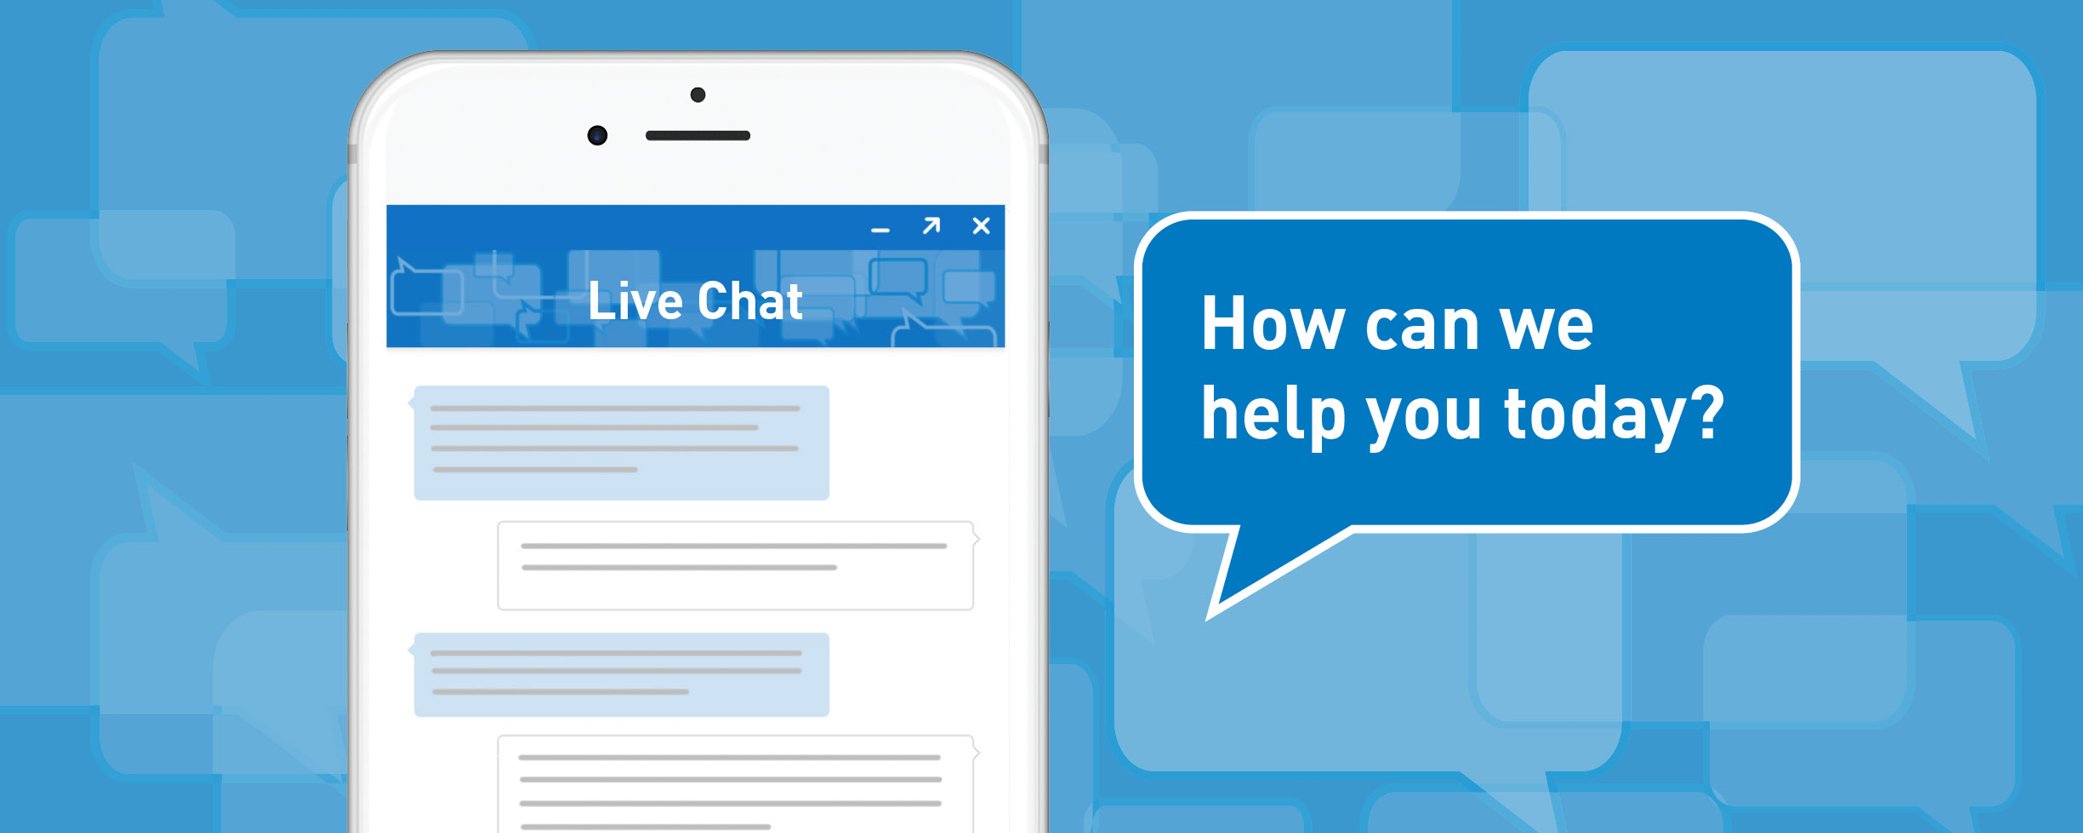 Live Chat on mobile app with text saying "How Can We Help You Today?"